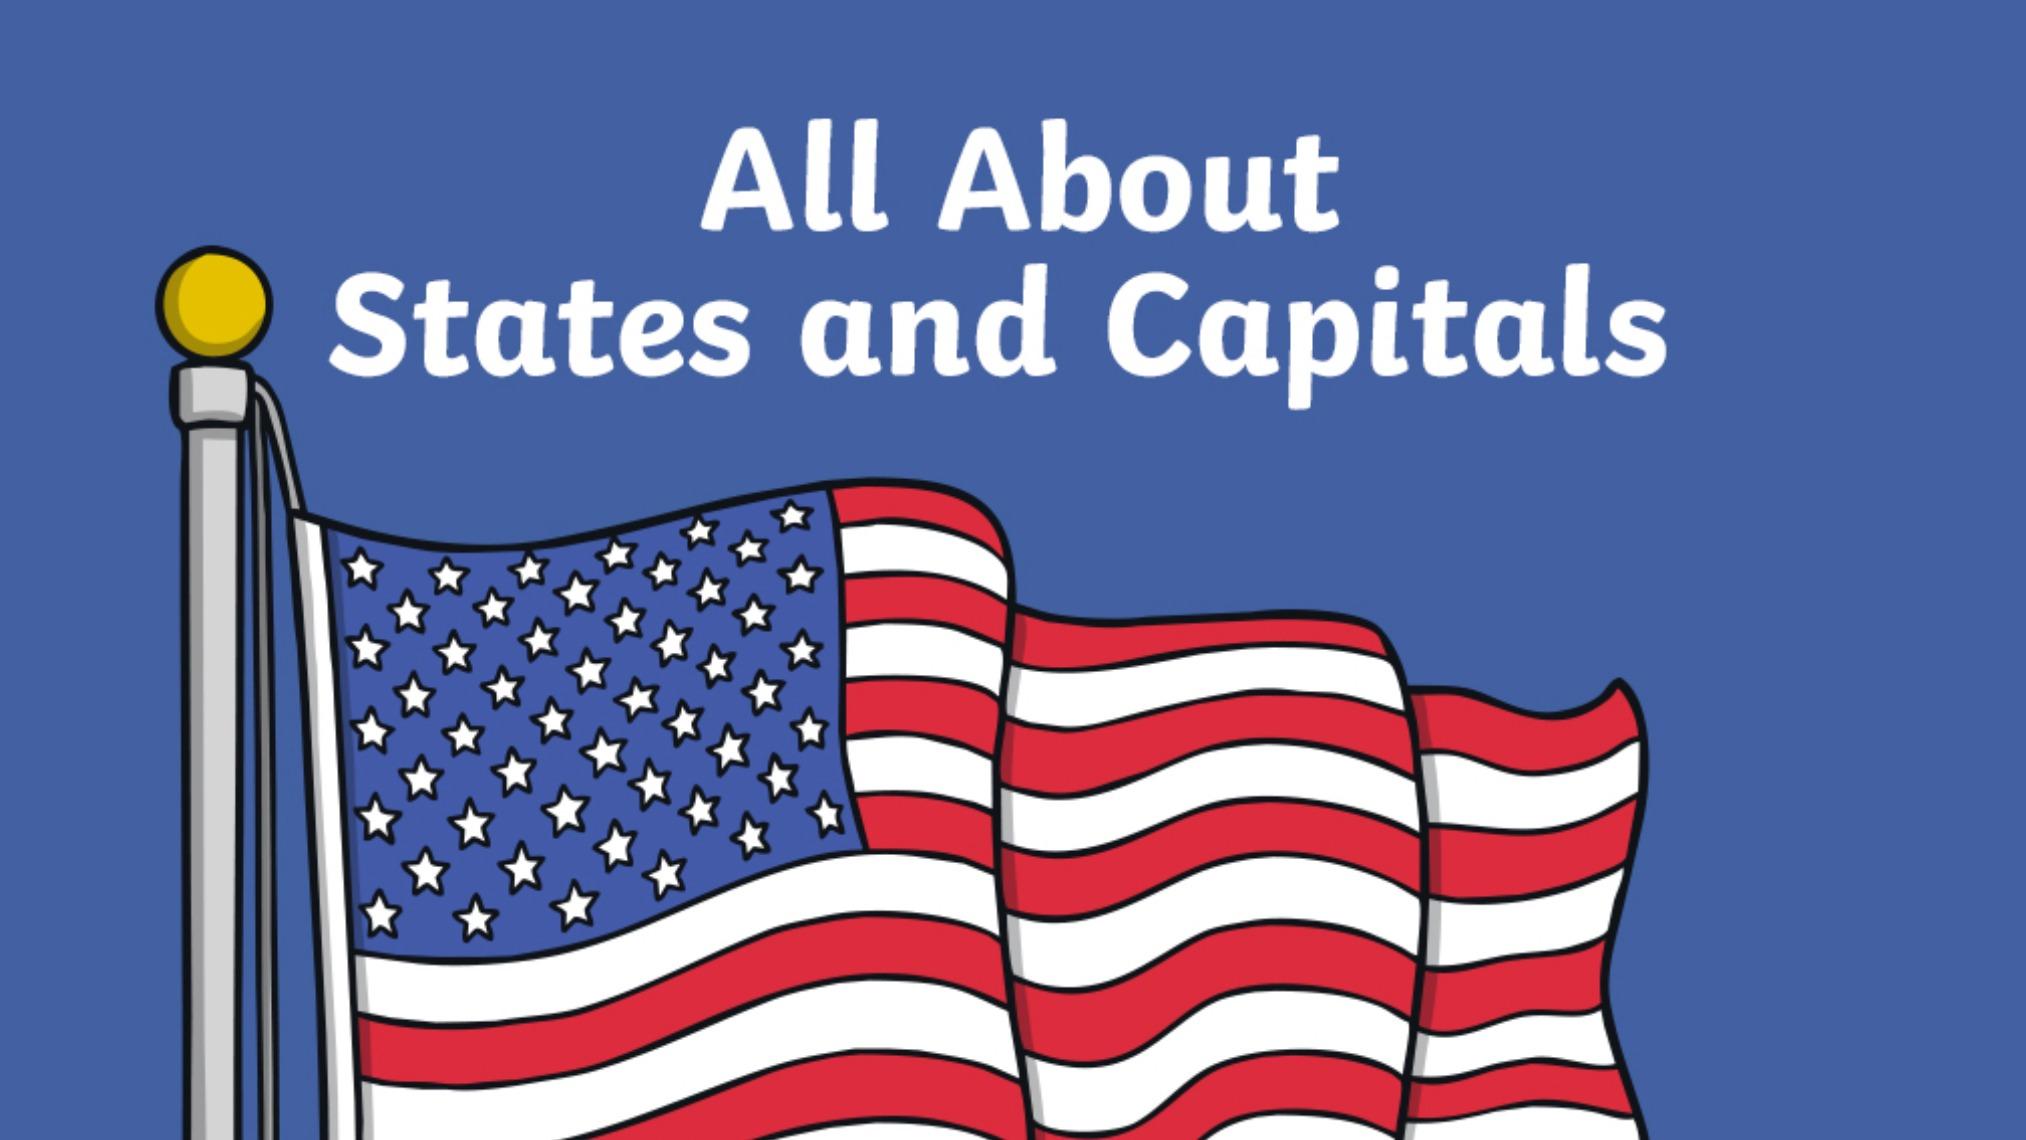 All About States and Capitals